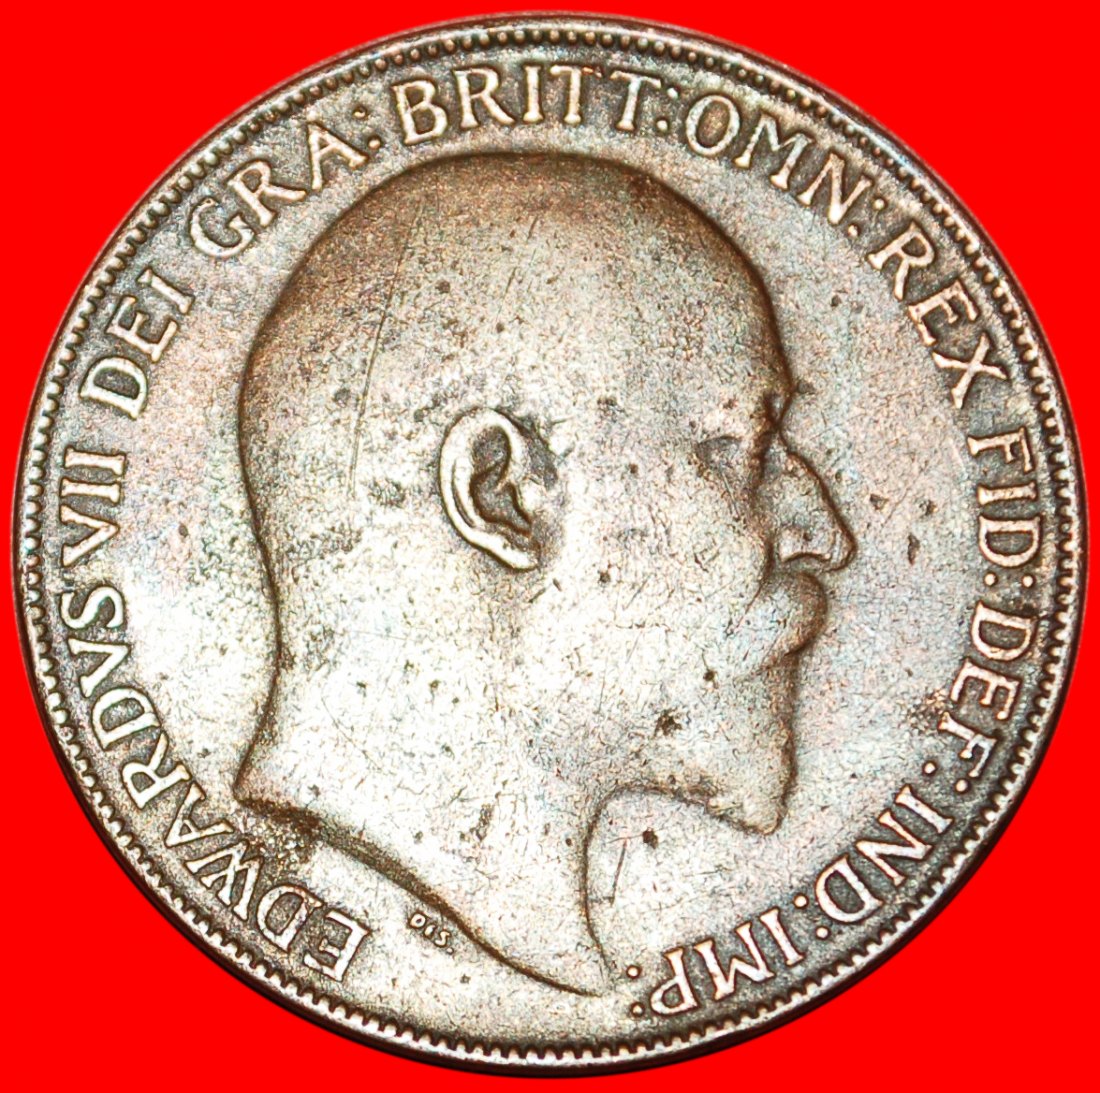  * MISTRESS OF THE SEAS★GREAT BRITAIN ★ PENNY 1909 EDWARD VII (1902-1910)! ★LOW START ★ NO RESERVE!!!   